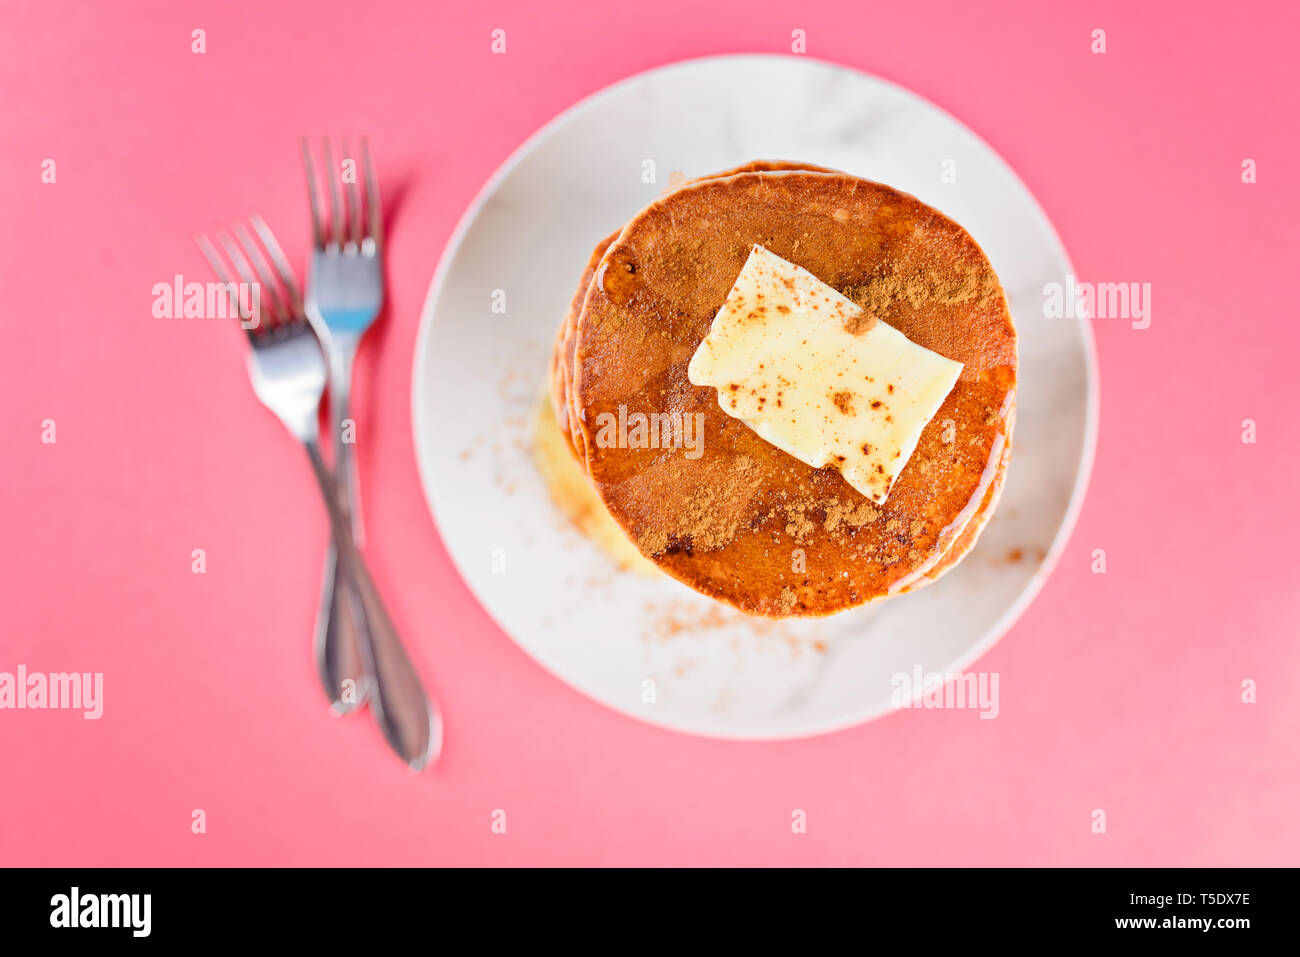 High pile of pancakes with butter, honey, cinnamon on top. Top view. Stock Photo